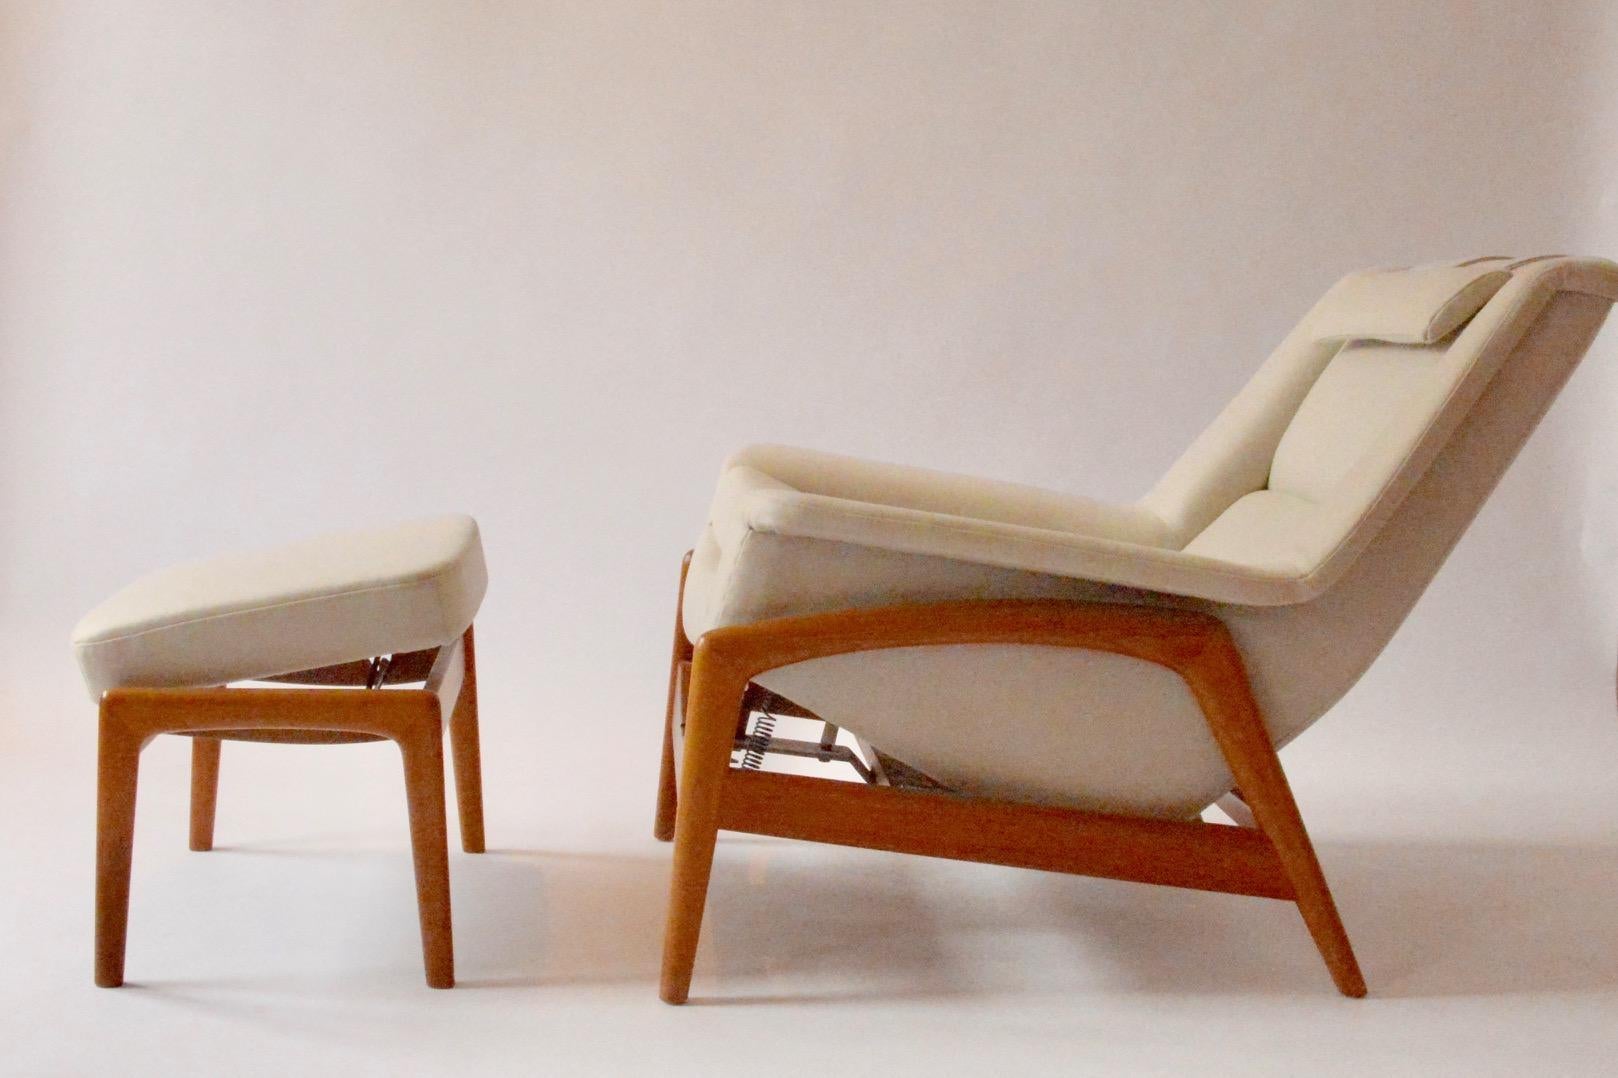 The profile easy chair by Folks Olsson is newly reupholstered with finest wool fabric, the wooden frame is of massive teak. It is manufactured by DUX, Sweden in the 1960s.

The design of the chair is extremely elegant and well-proportioned